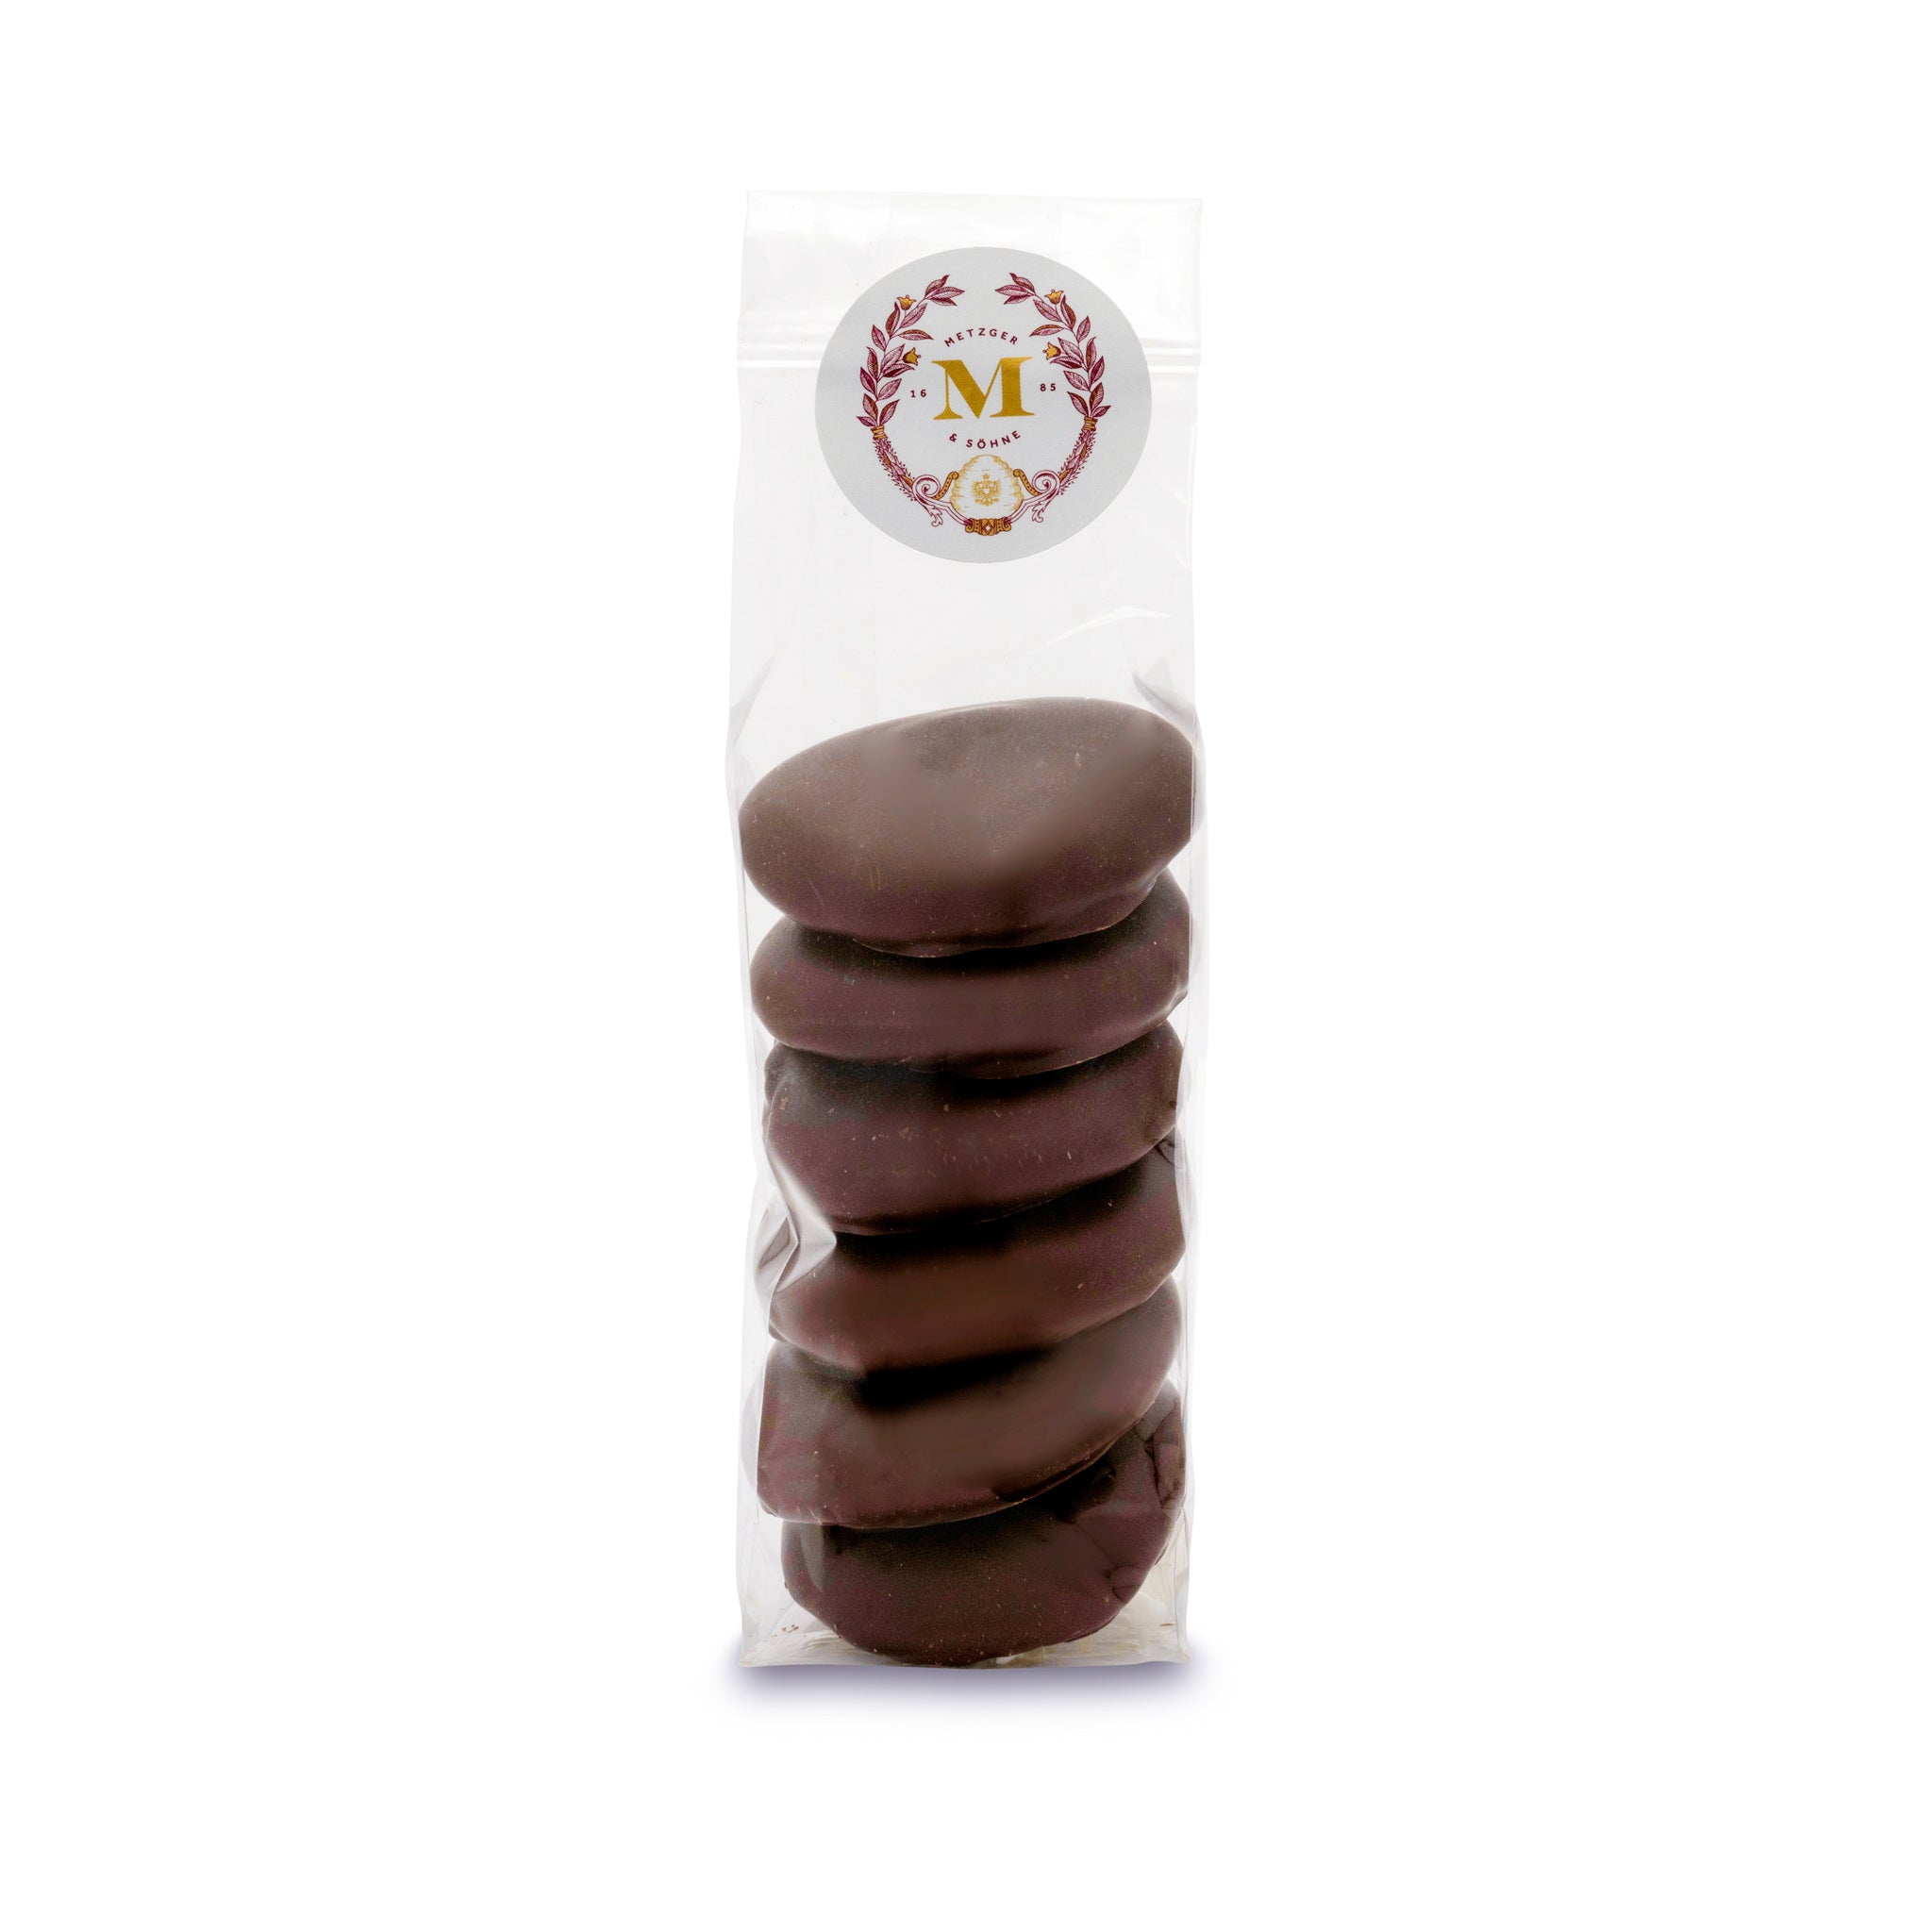 Our Lebkuchen robbins are a real treat: original Lebkuchen cookies covered in high quality, dark chocolate couverture. The high quality chocolate couvertures enchant with an indulgent flavour, perfectly complimenting our Lebkuchen. A delicious chocolate cookie we can all enjoy, full of natural flavours.